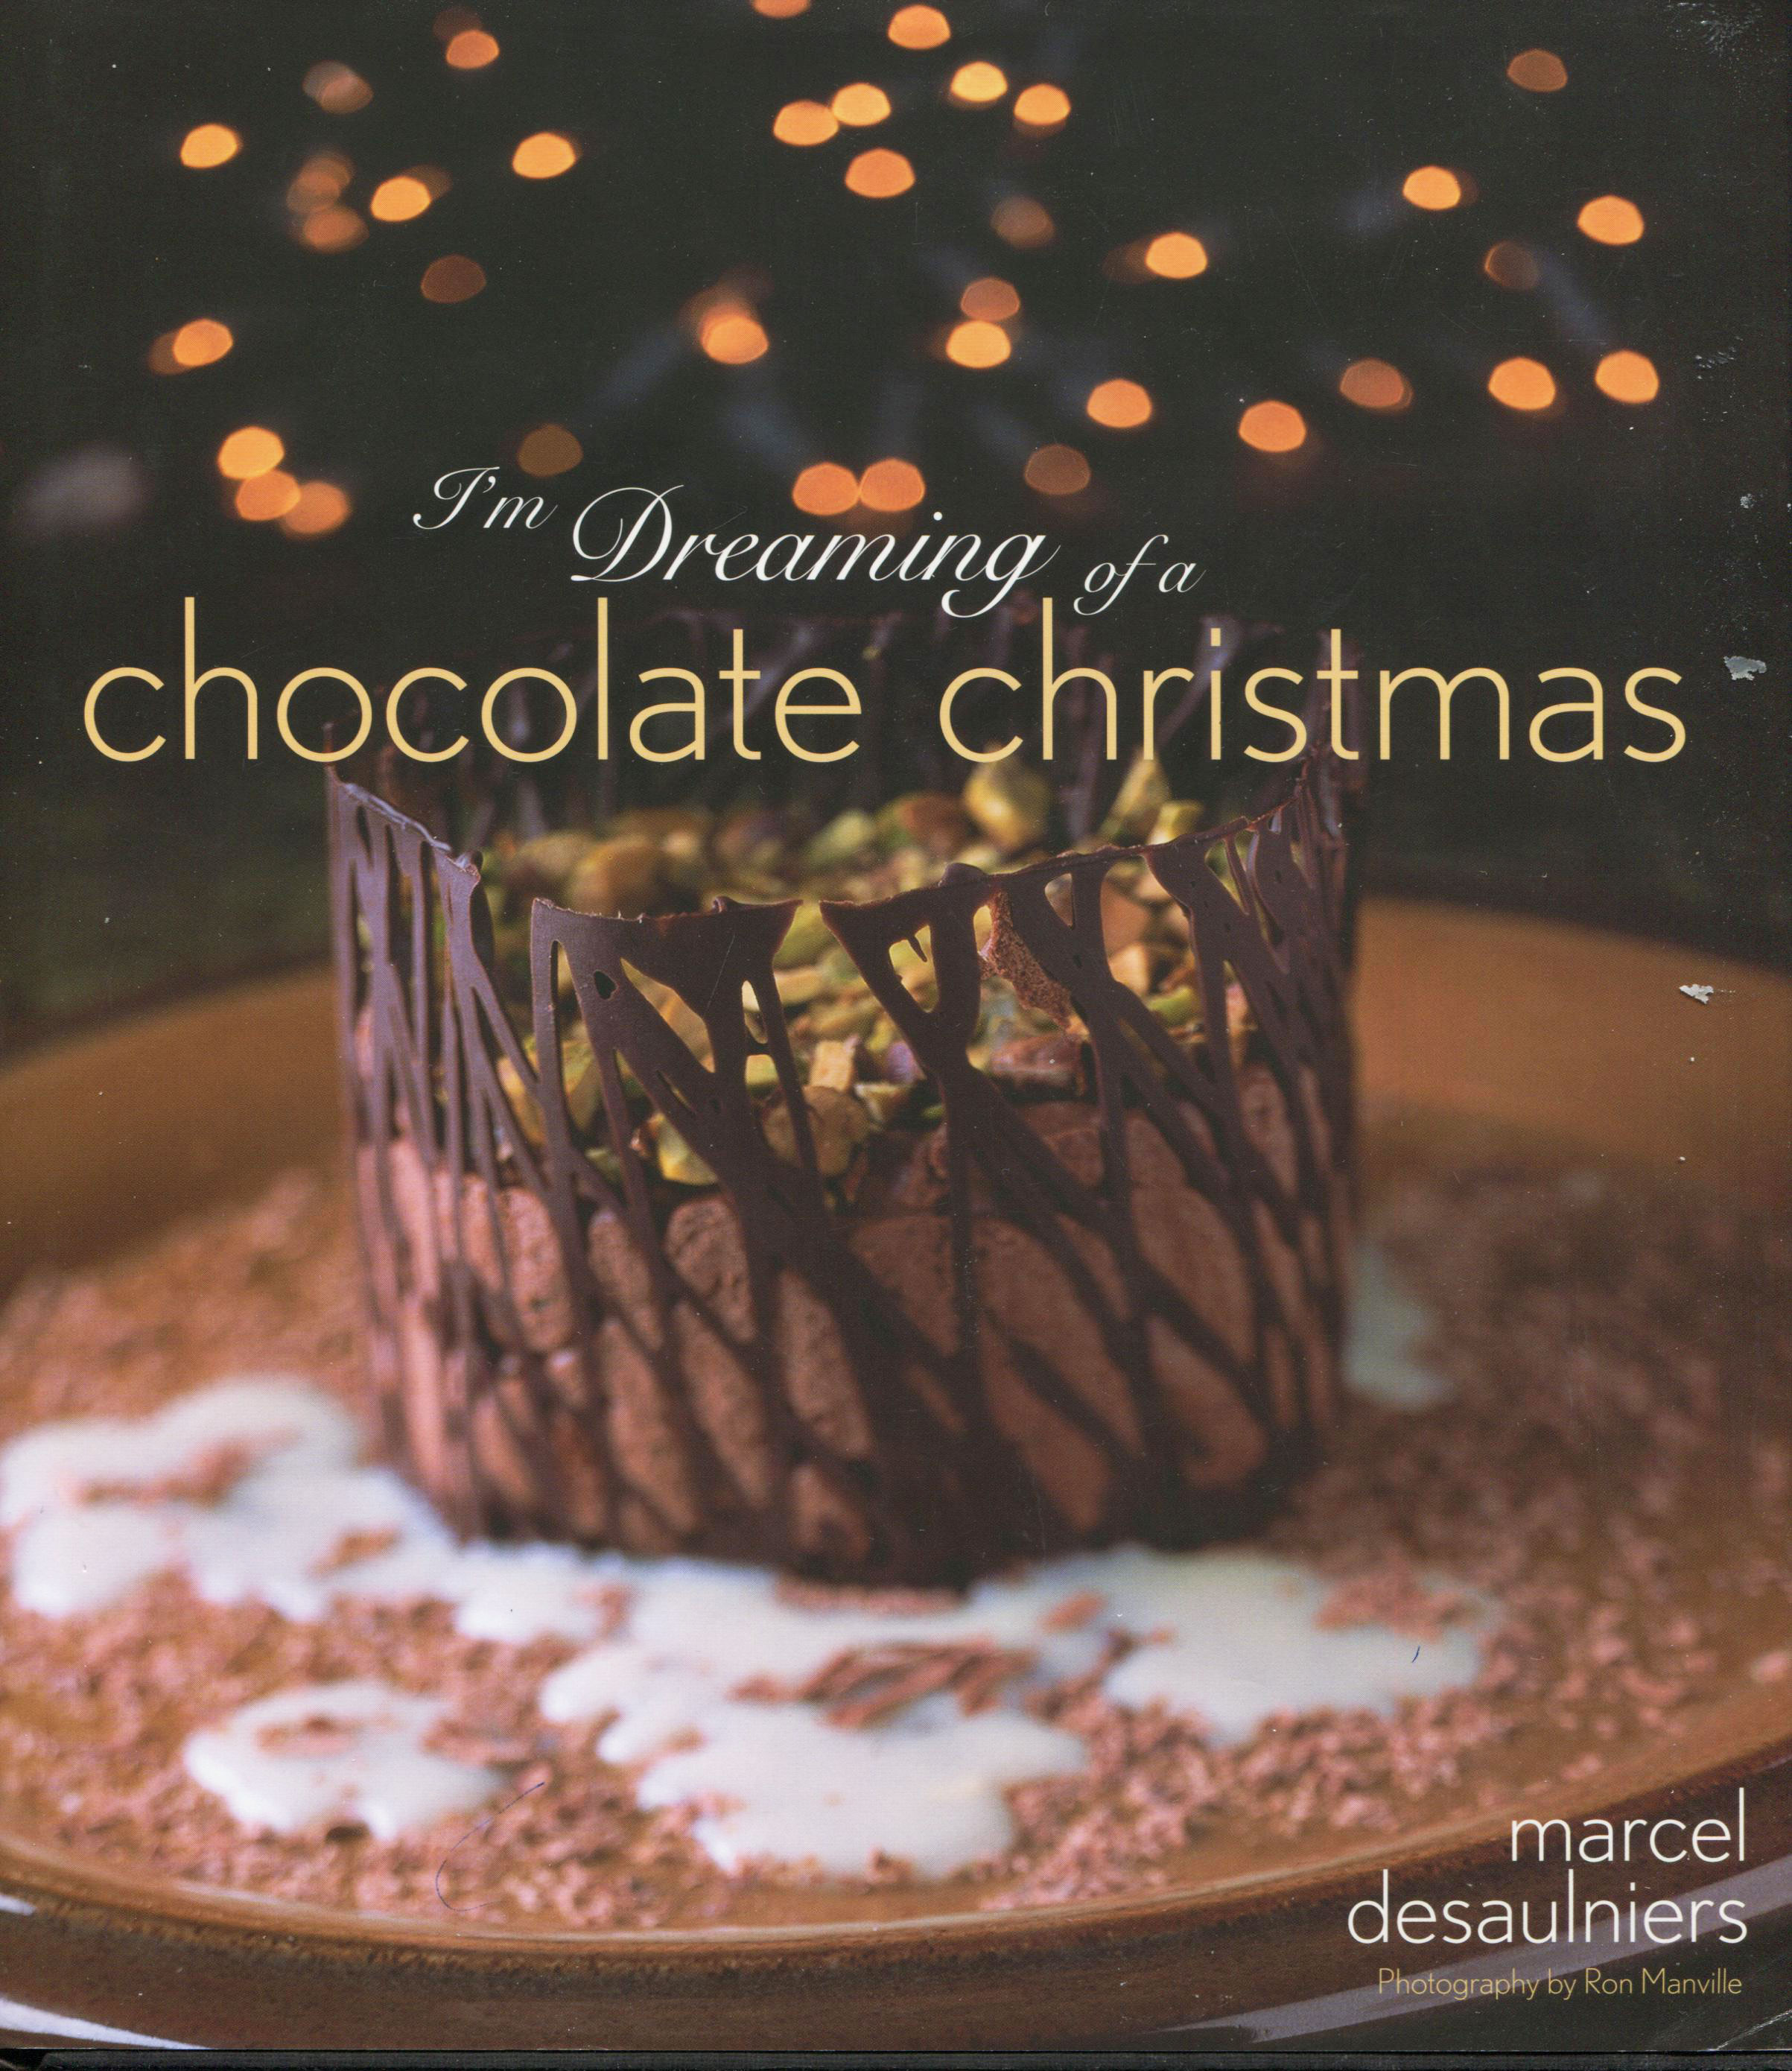 TBT Cookbook Review: I’m Dreaming of a Chocolate Christmas by Marcel Desaulniers